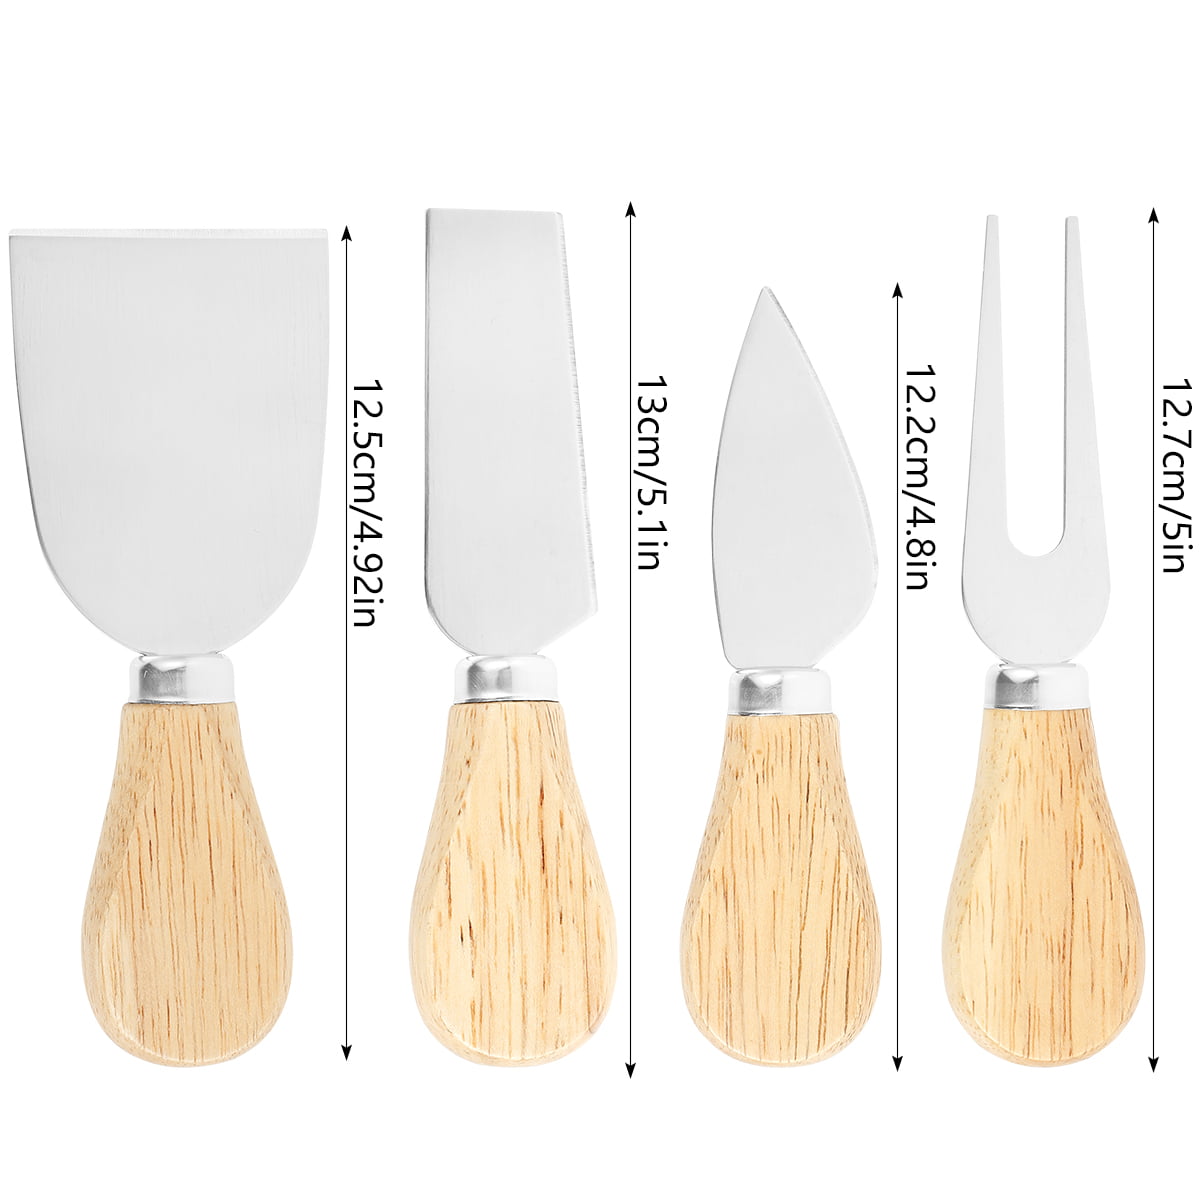 Fork Cheddar Choose Various Stainless Steel & Wooden Cheese Knives Stilton 